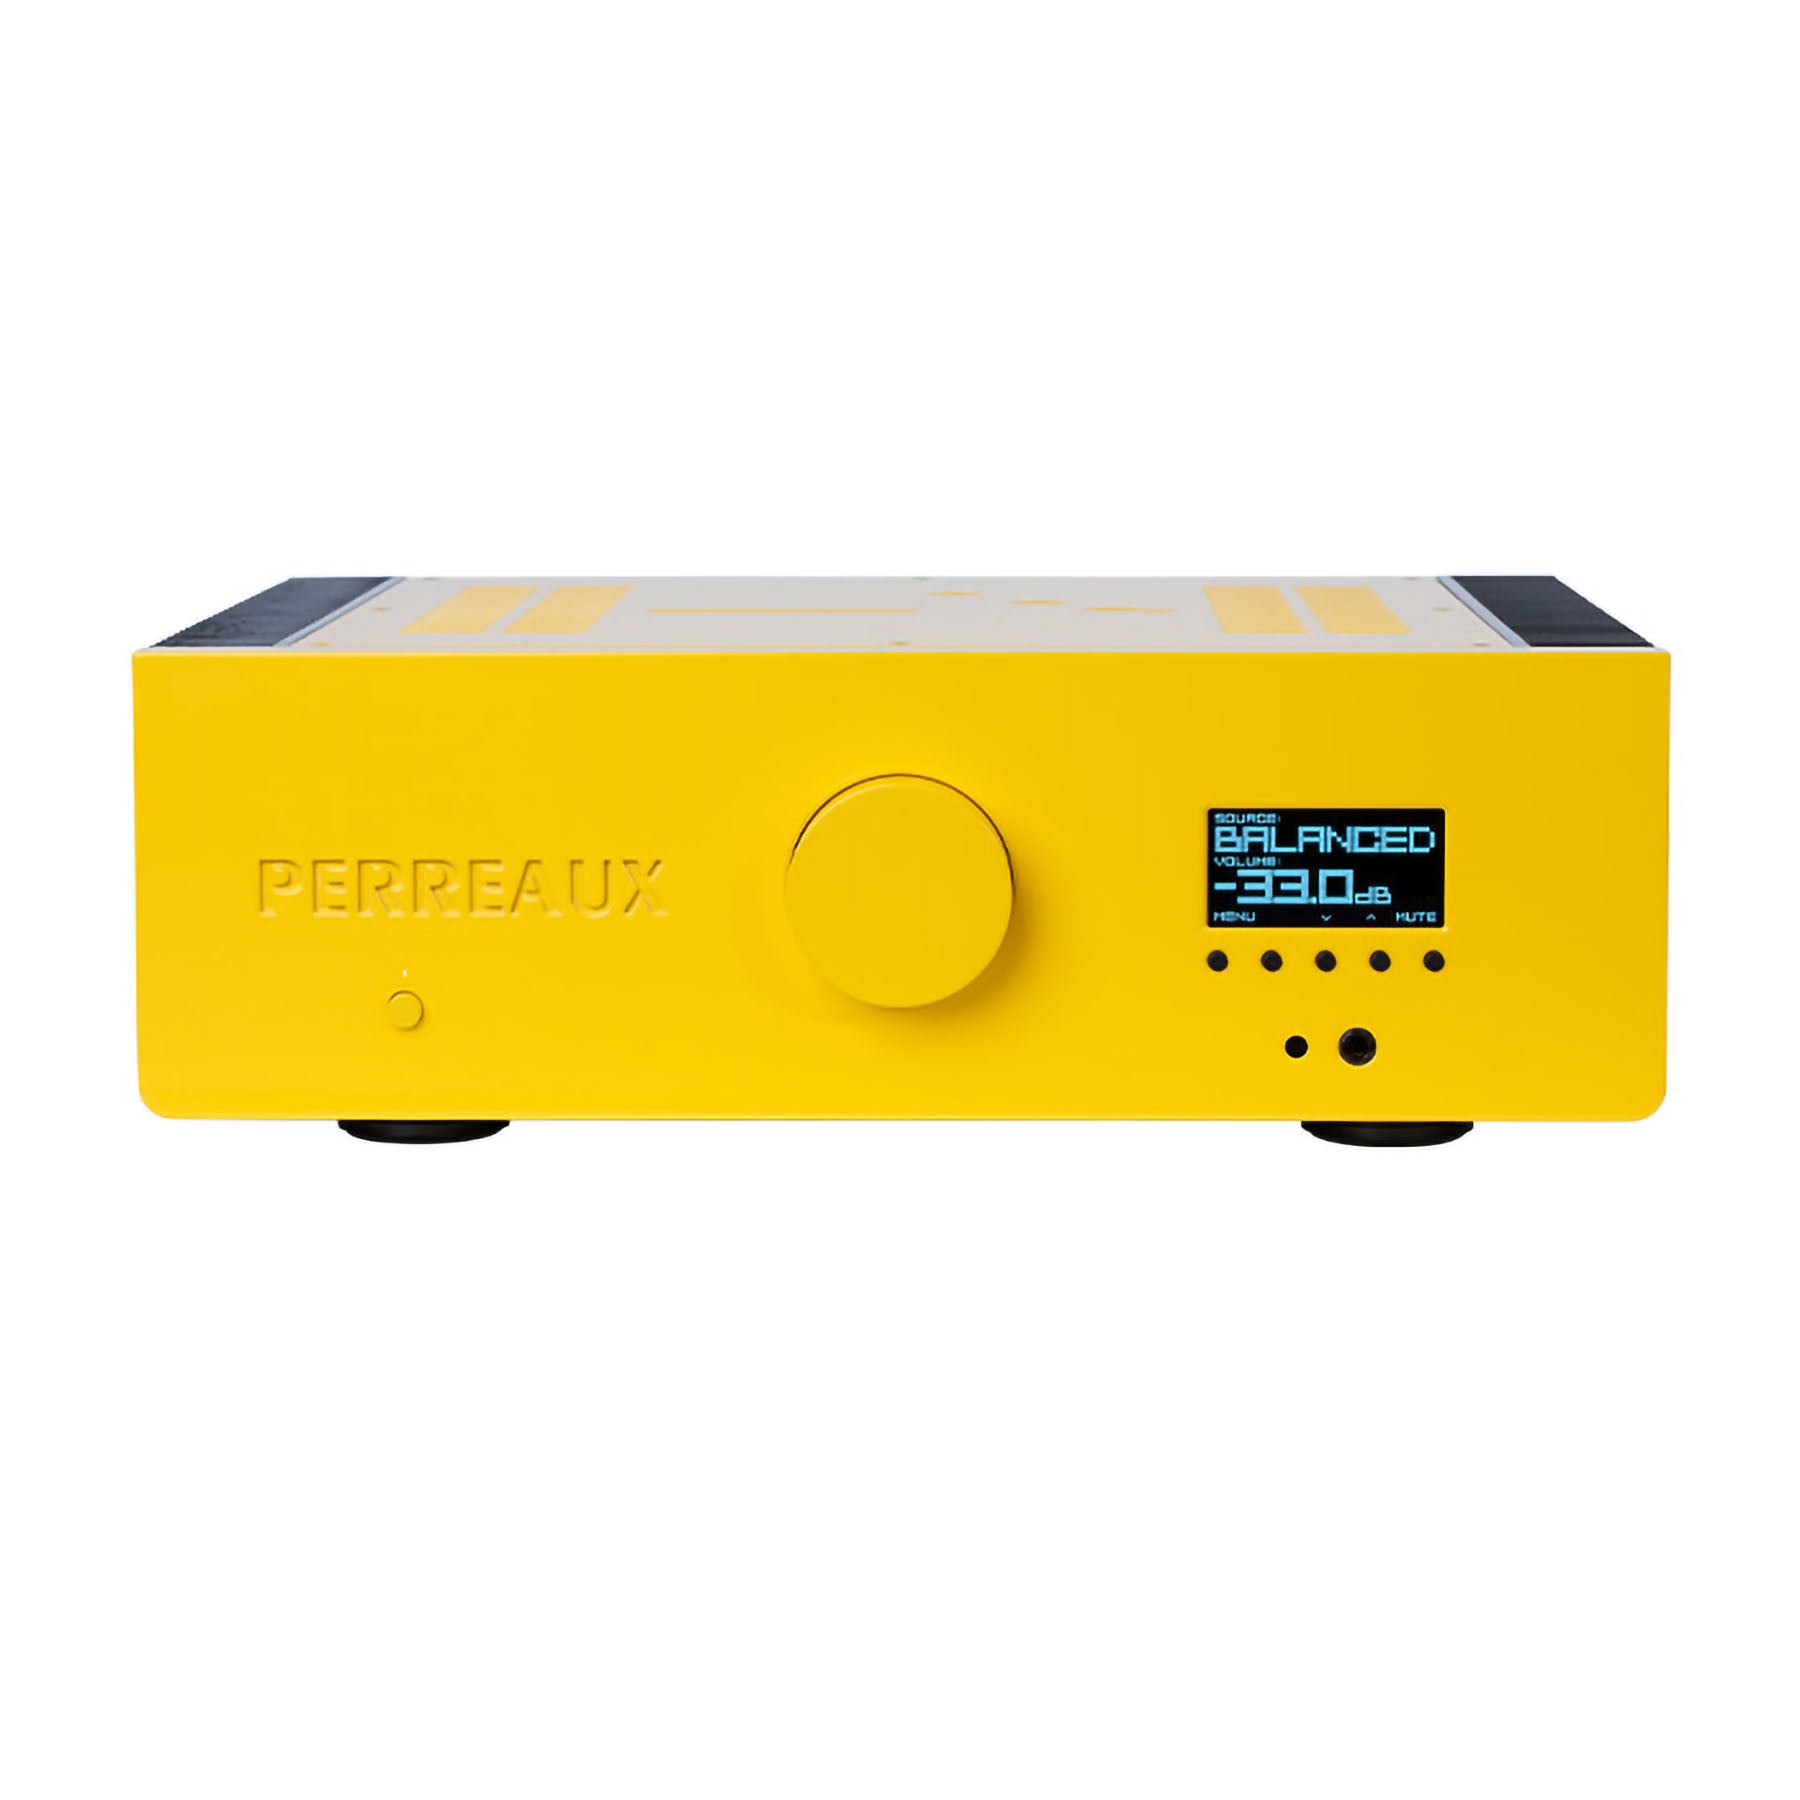 Perreaux 300iX Stereo Integrated Amplifier